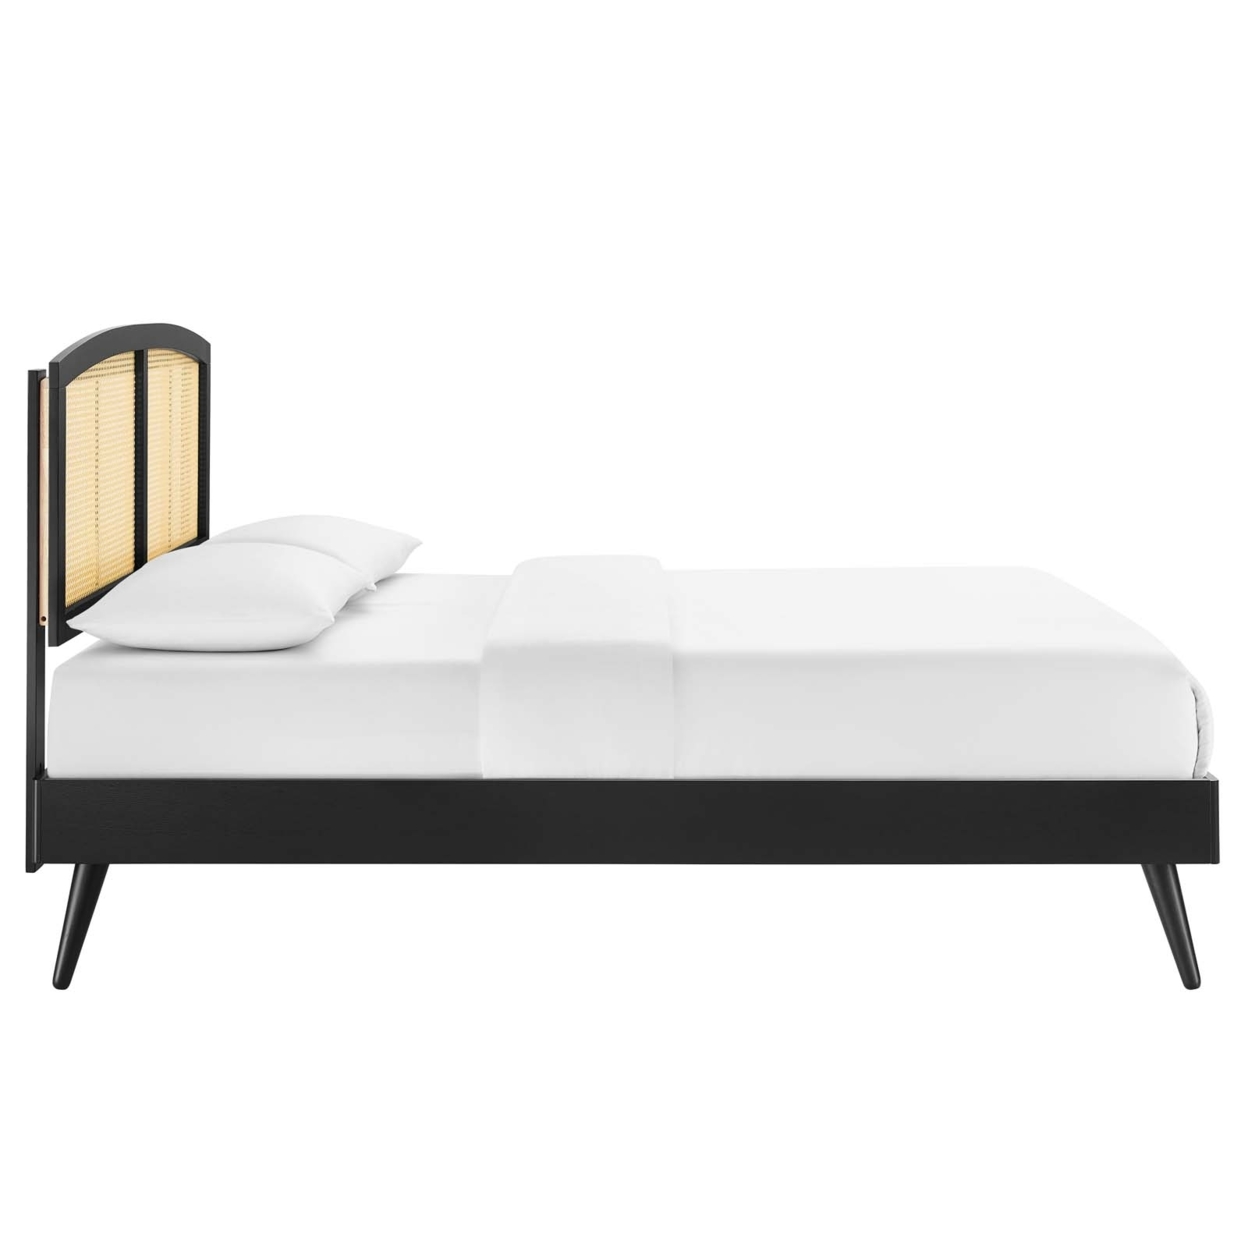 Sierra Cane And Wood Full Platform Bed With Splayed Legs, Black